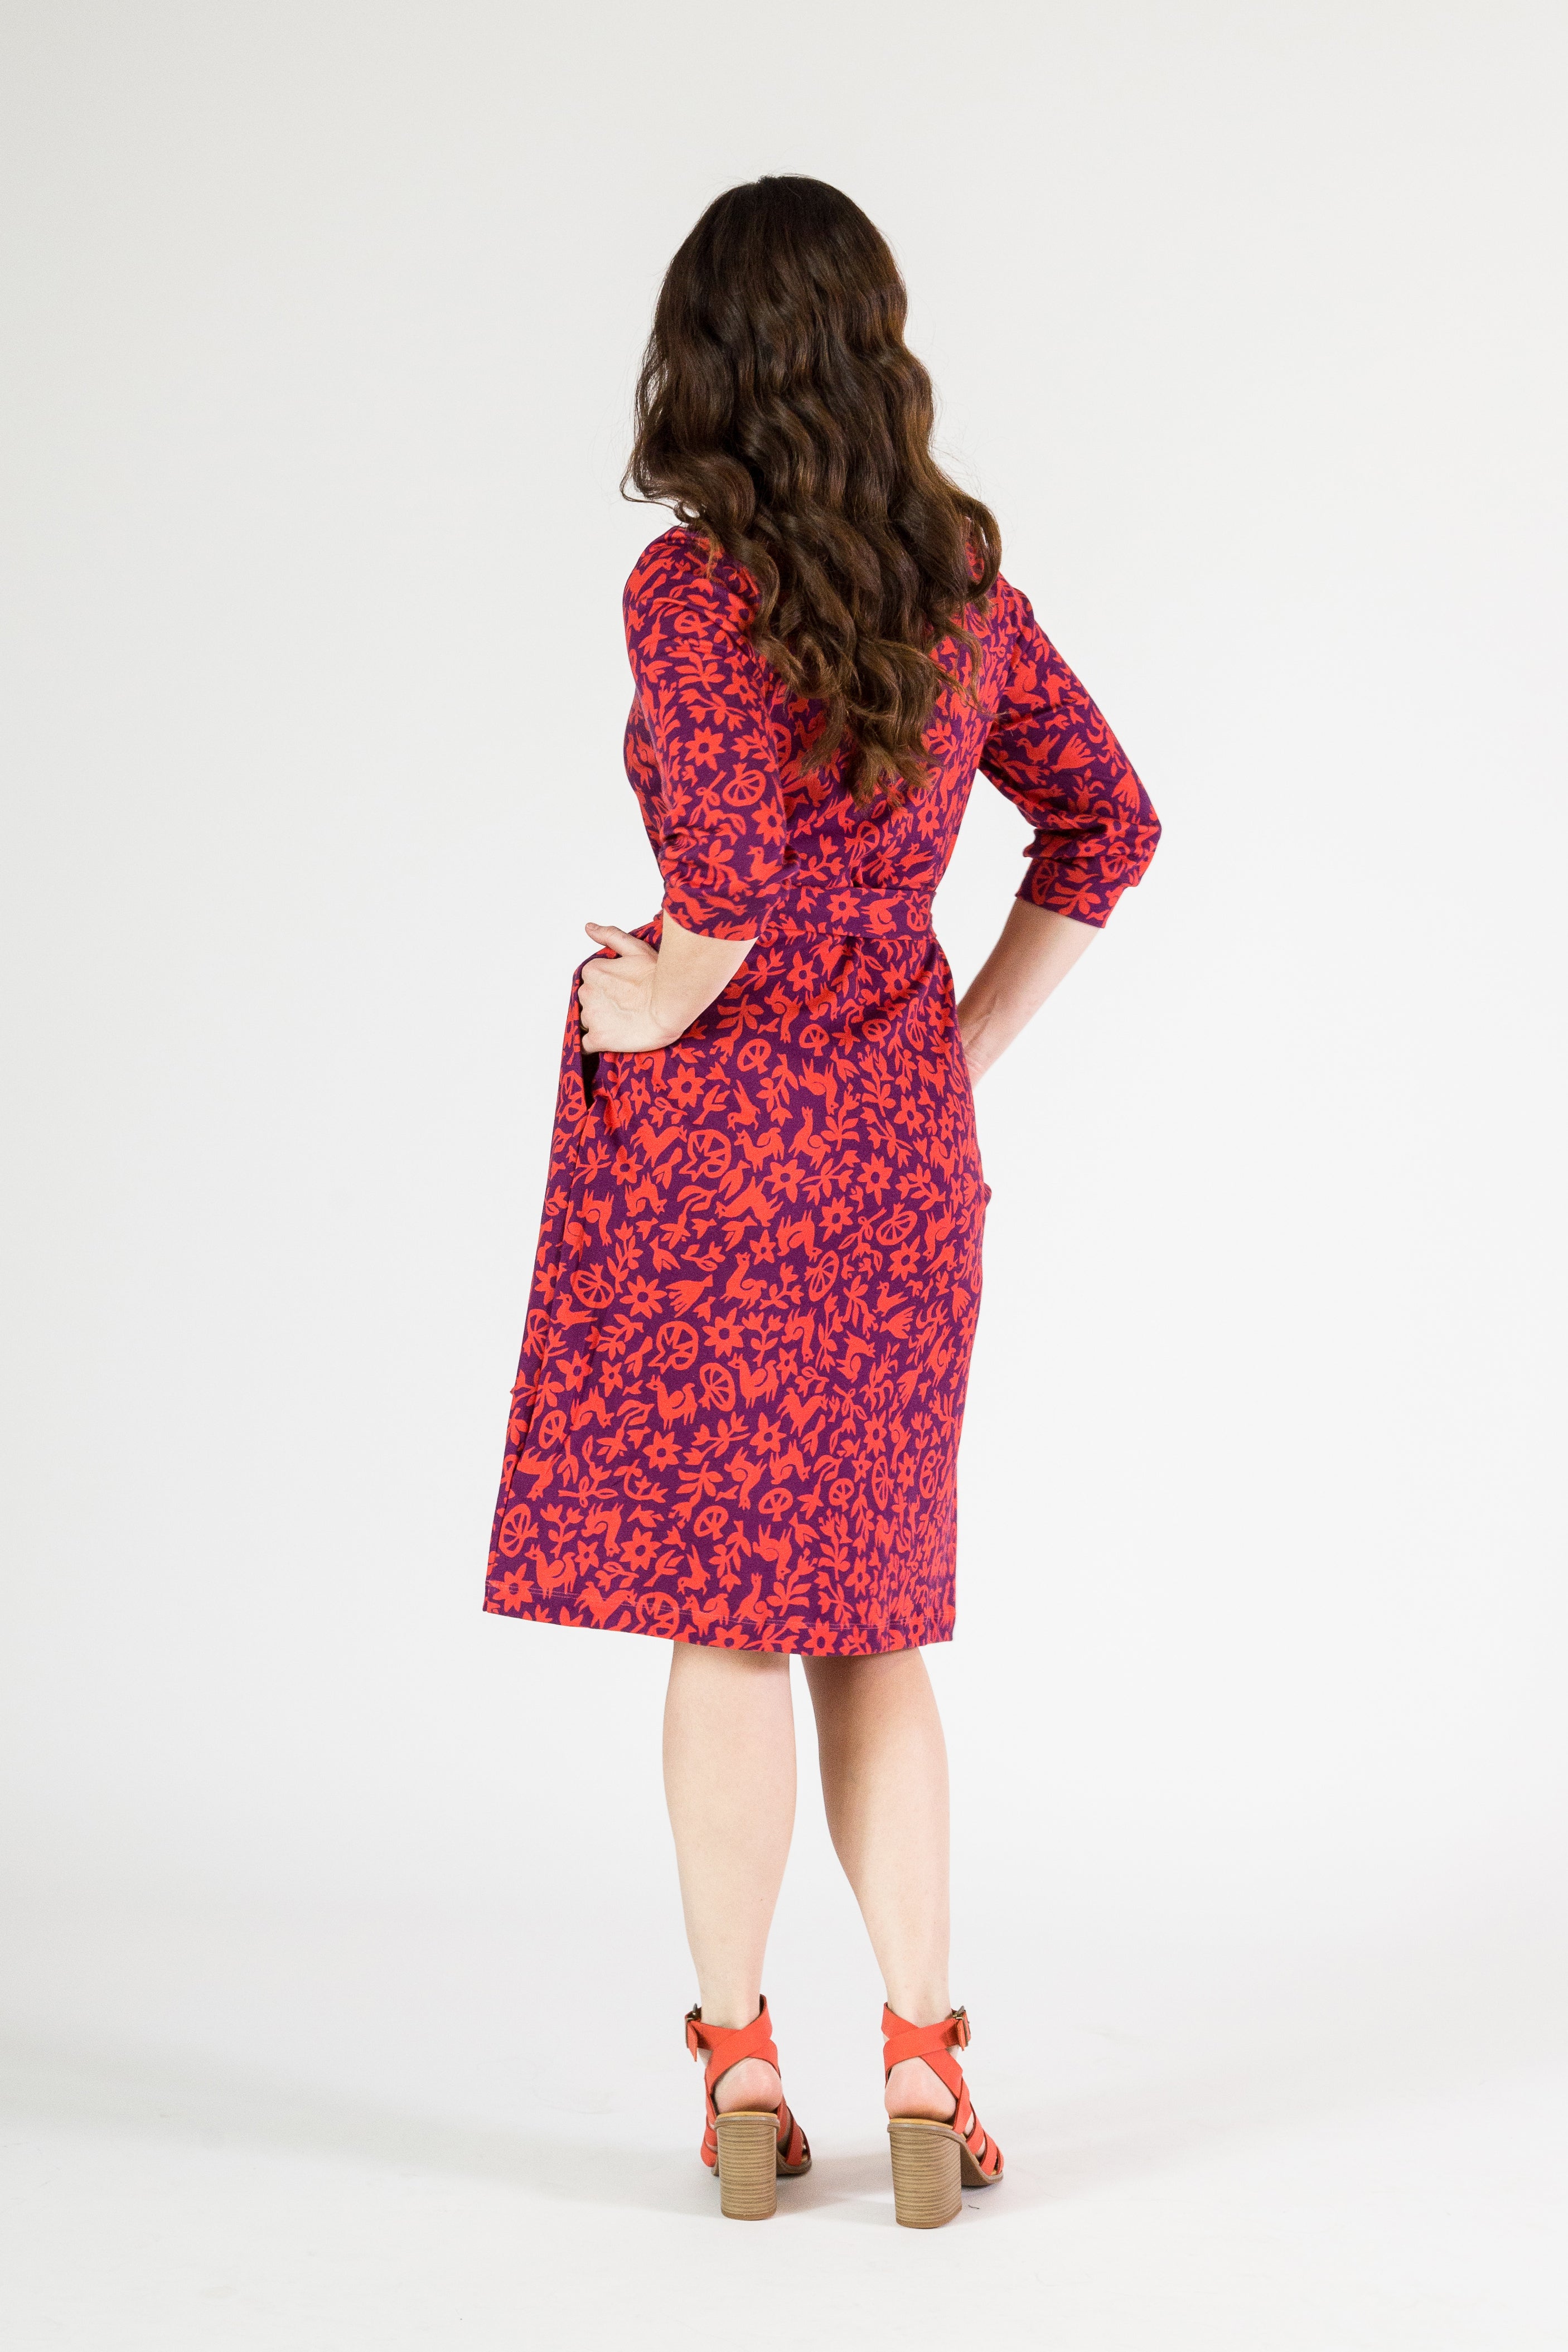 Belted Tunic Dress - Pasto Print Purple and Red